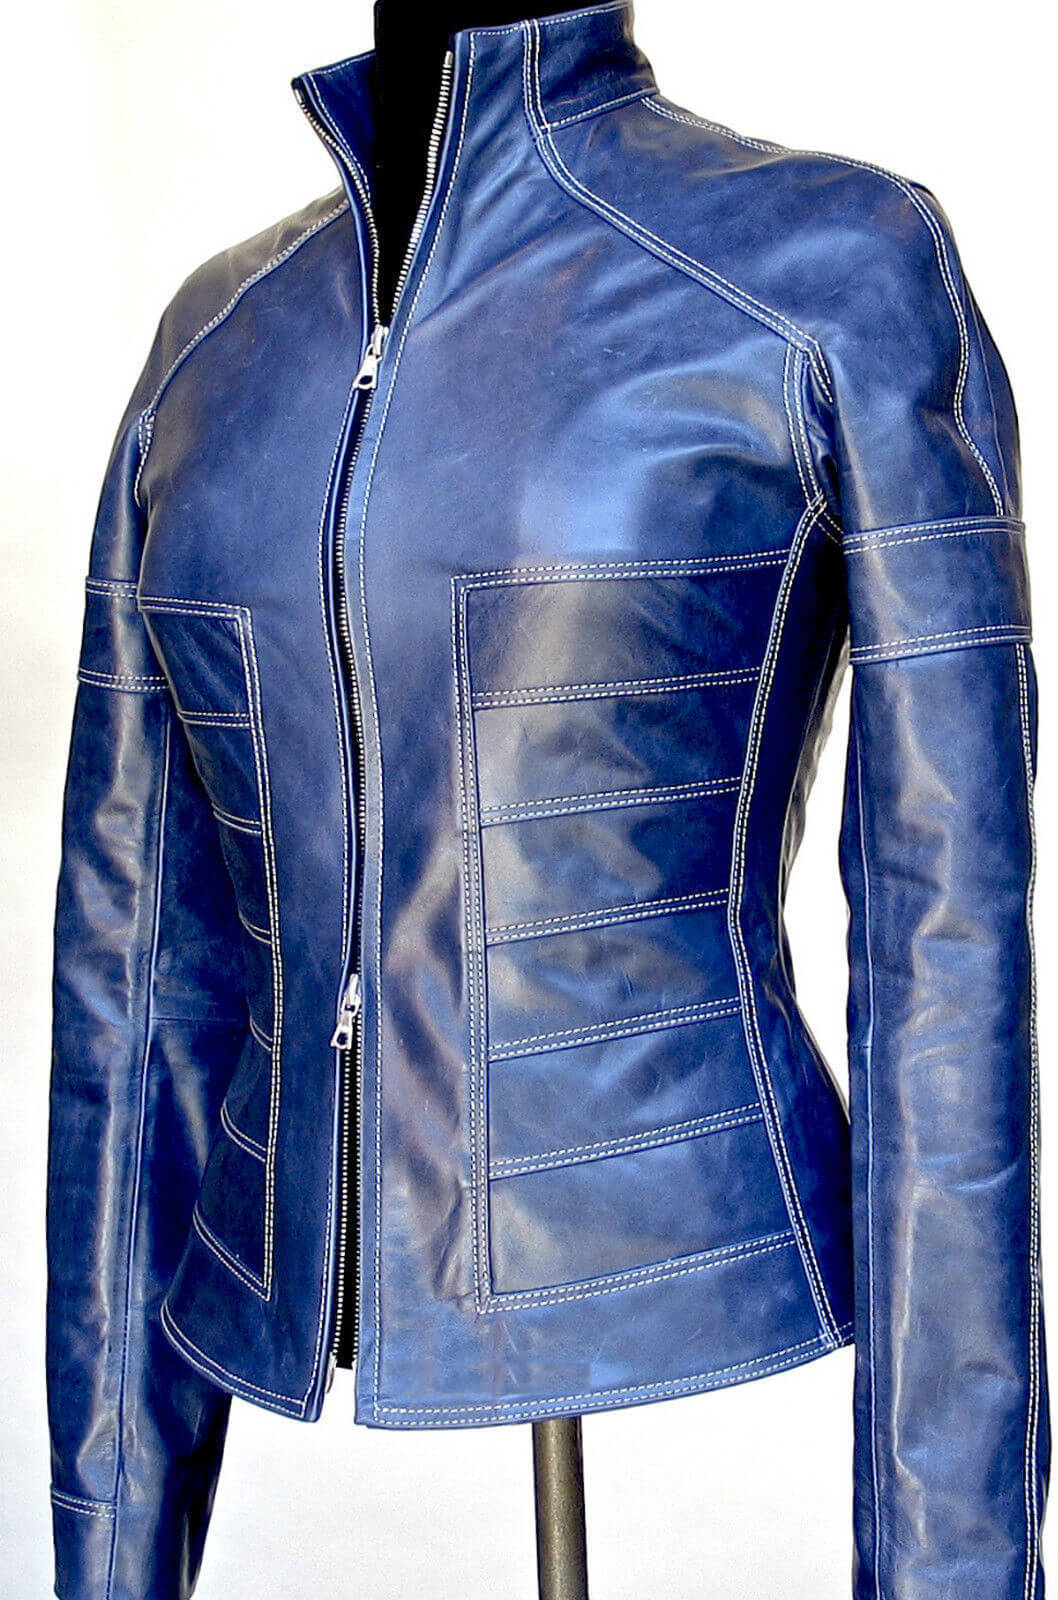 Royal Blue Leather Jacket Womens With Fur Collar